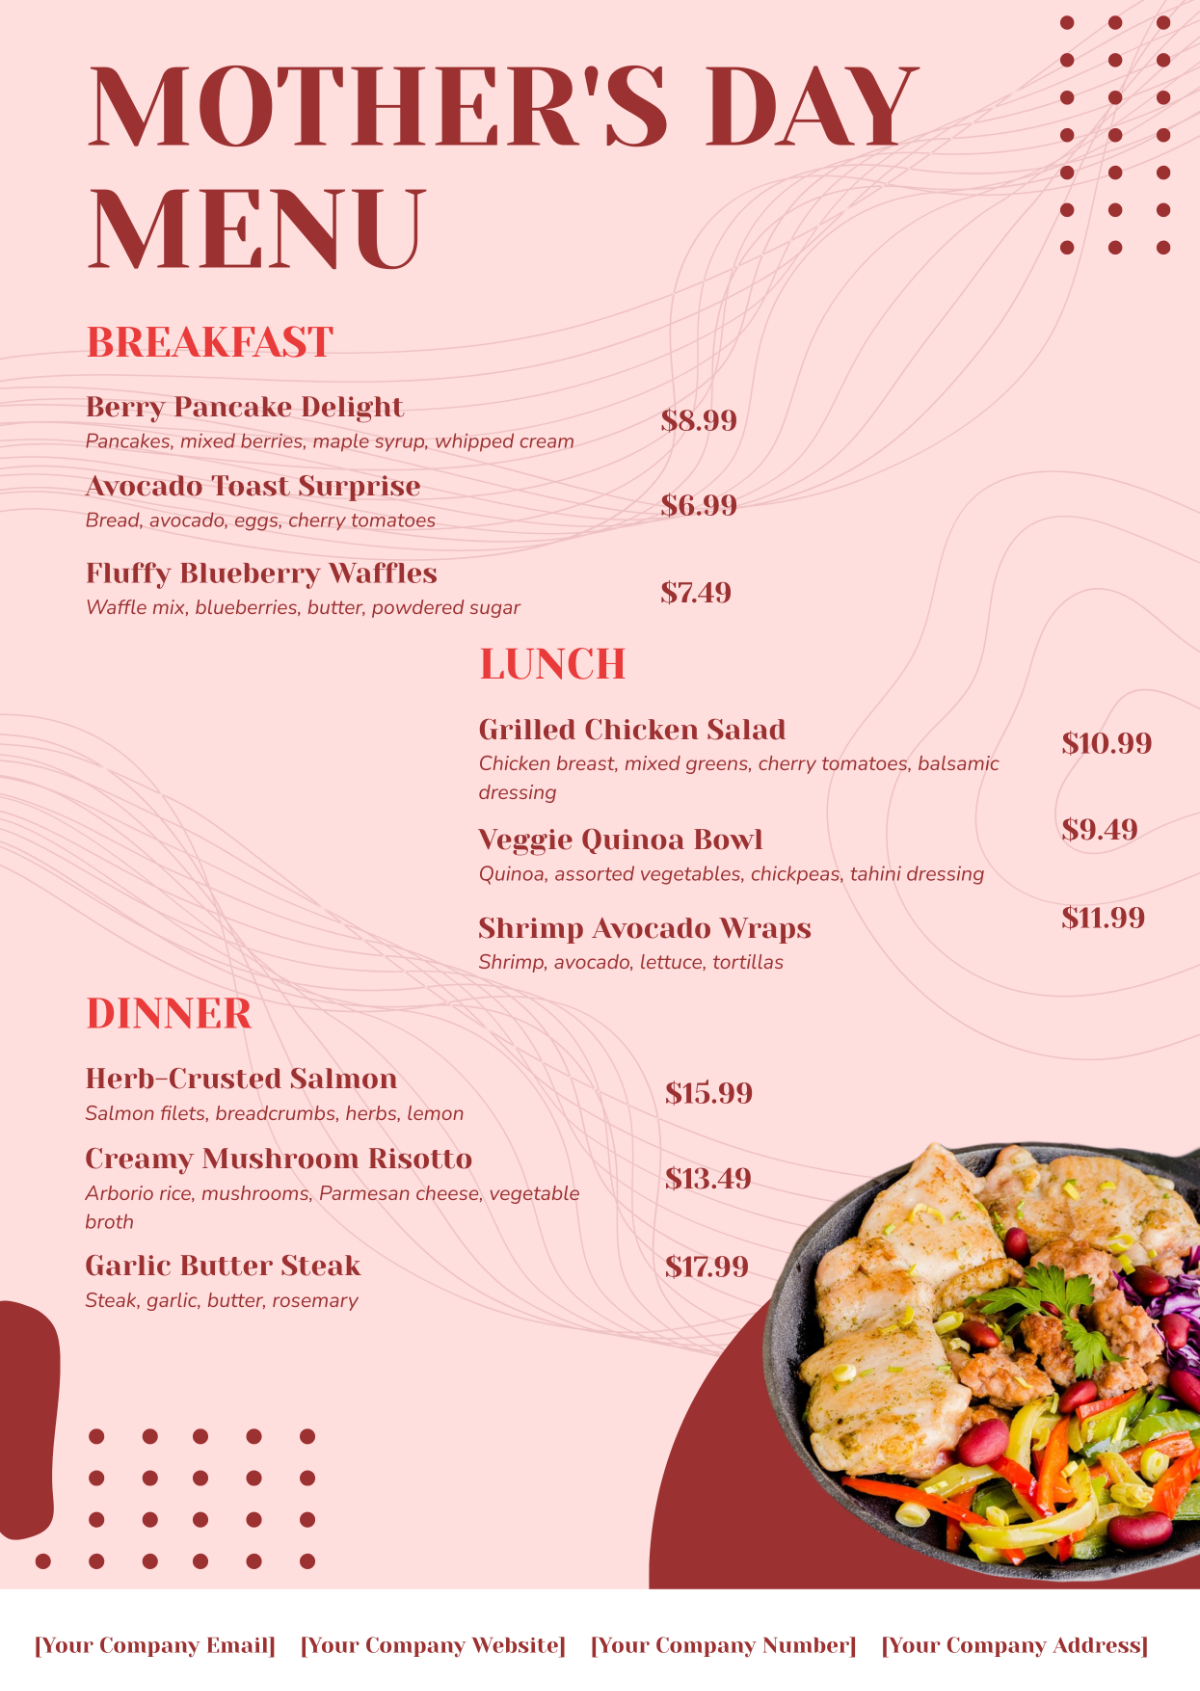 Free Mother's Day Menu Template